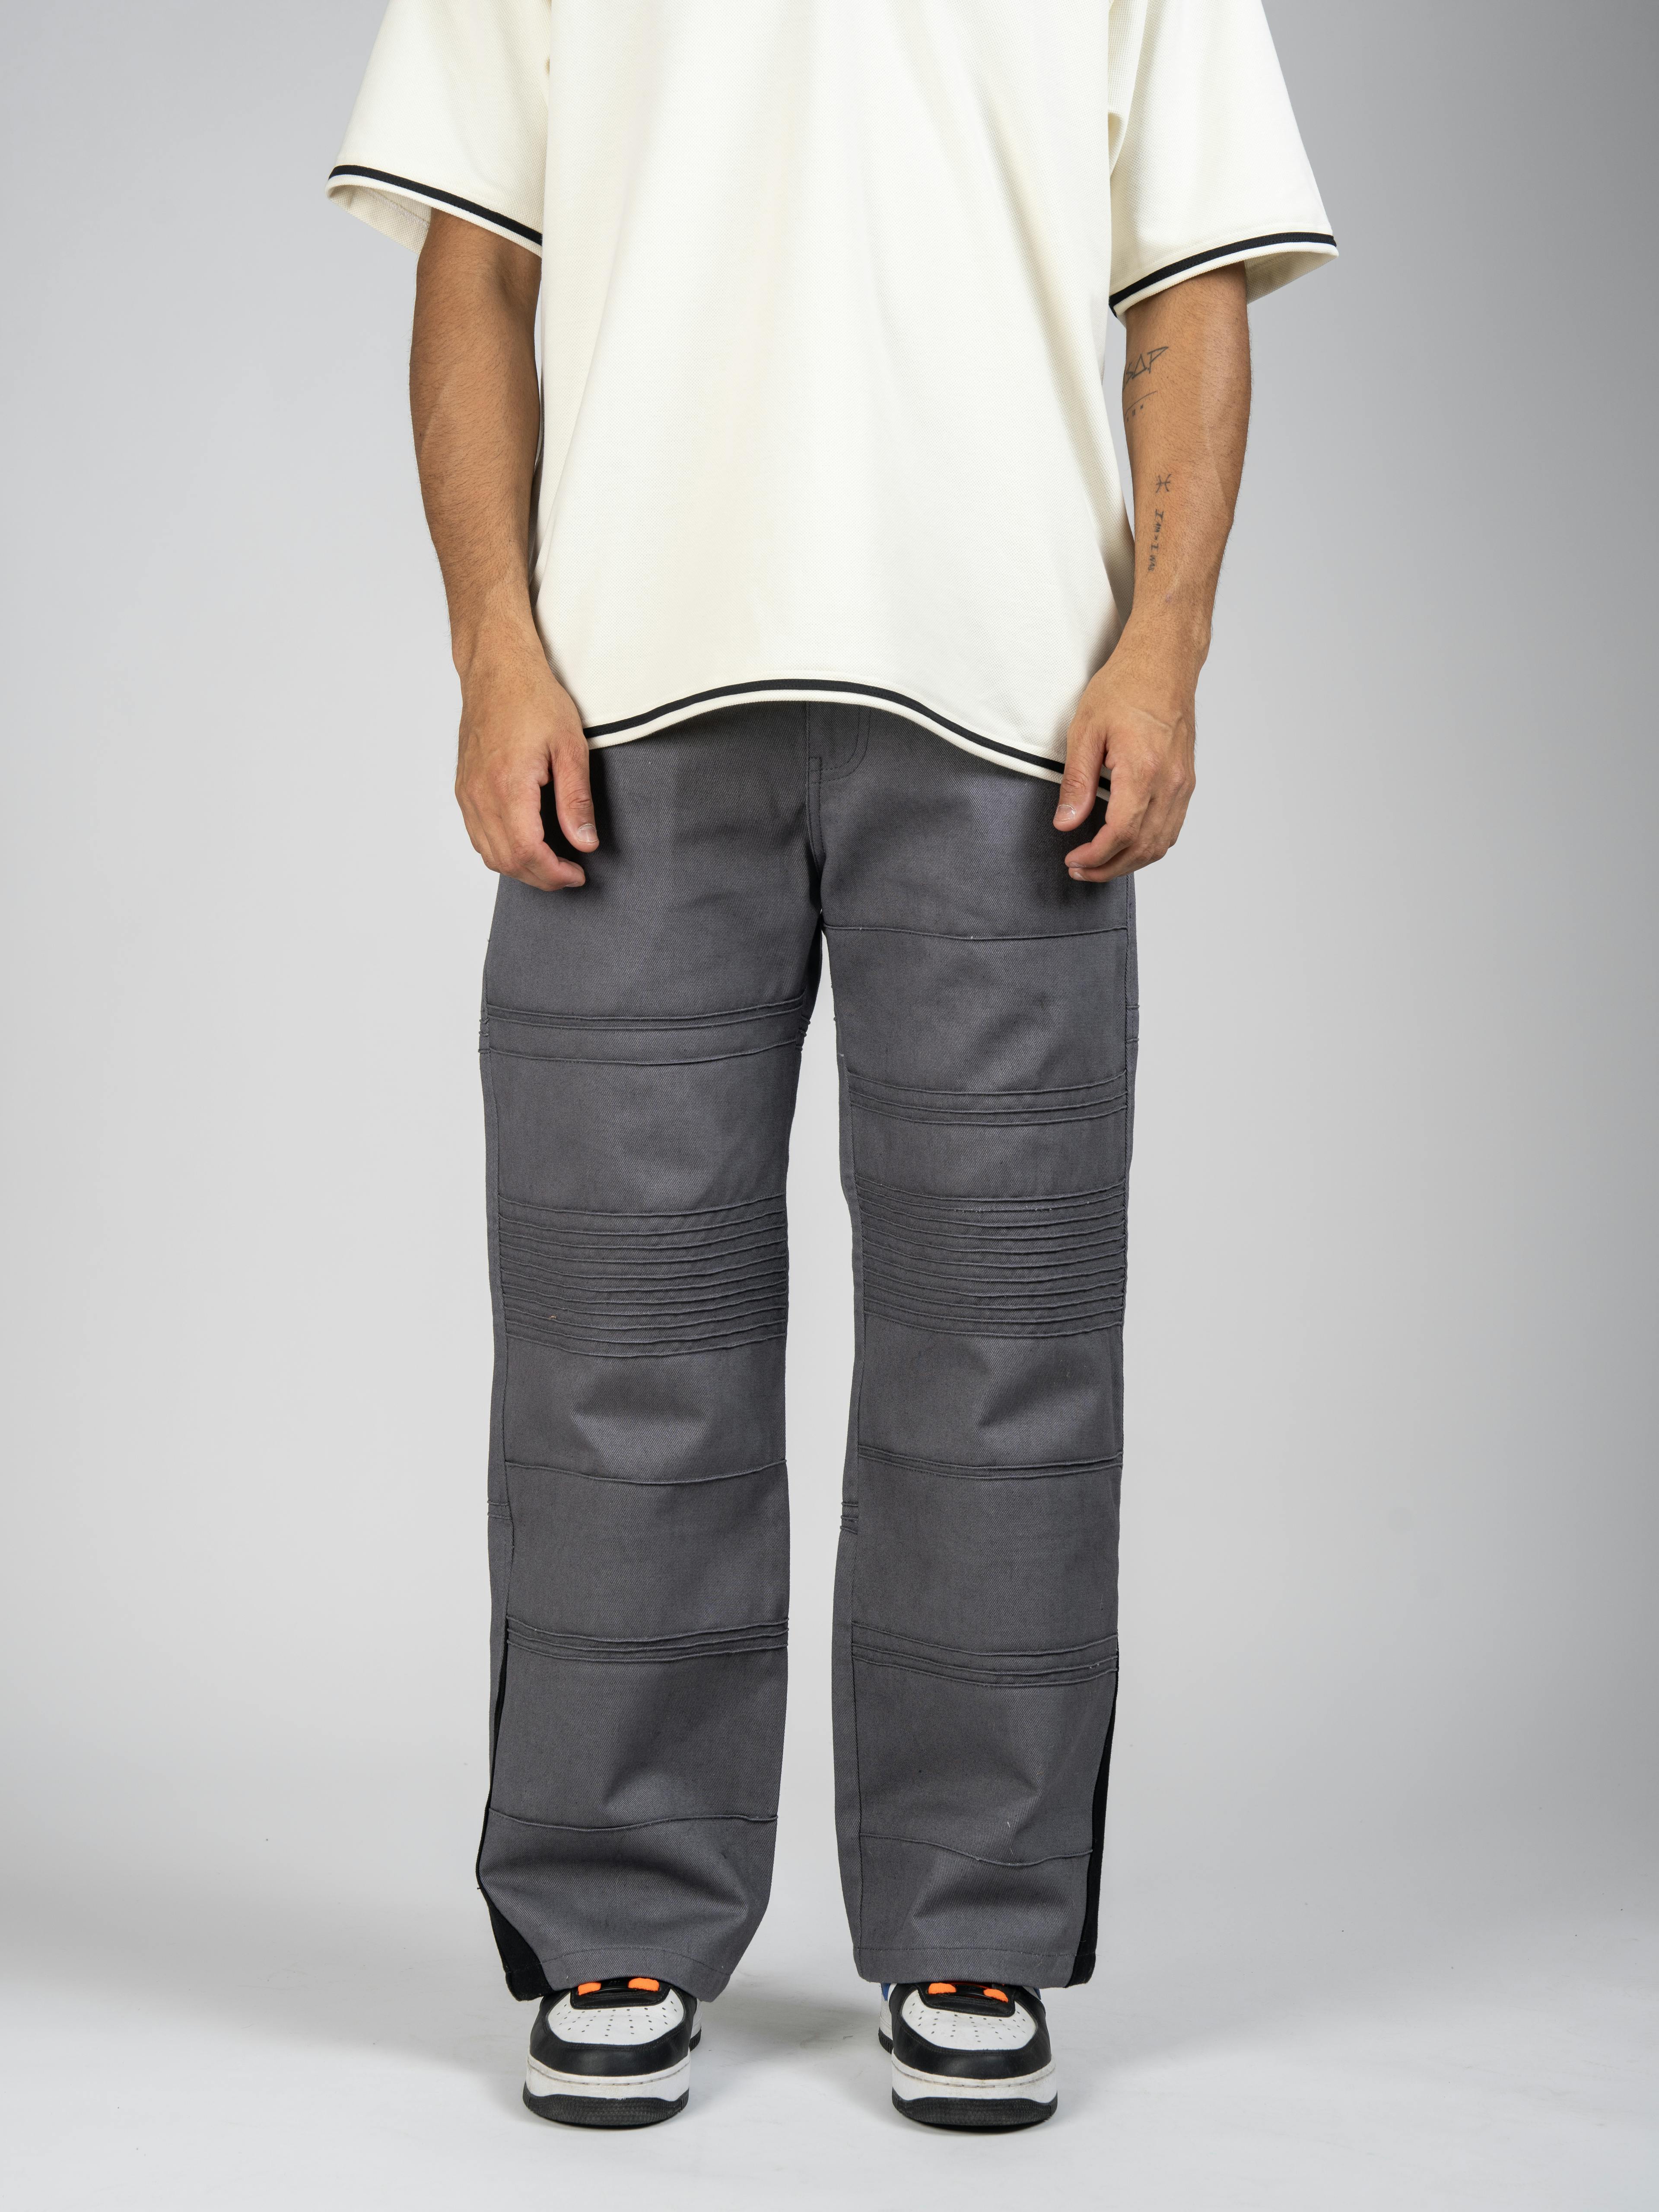 Charcoal Lined Denim, a product by TOFFLE